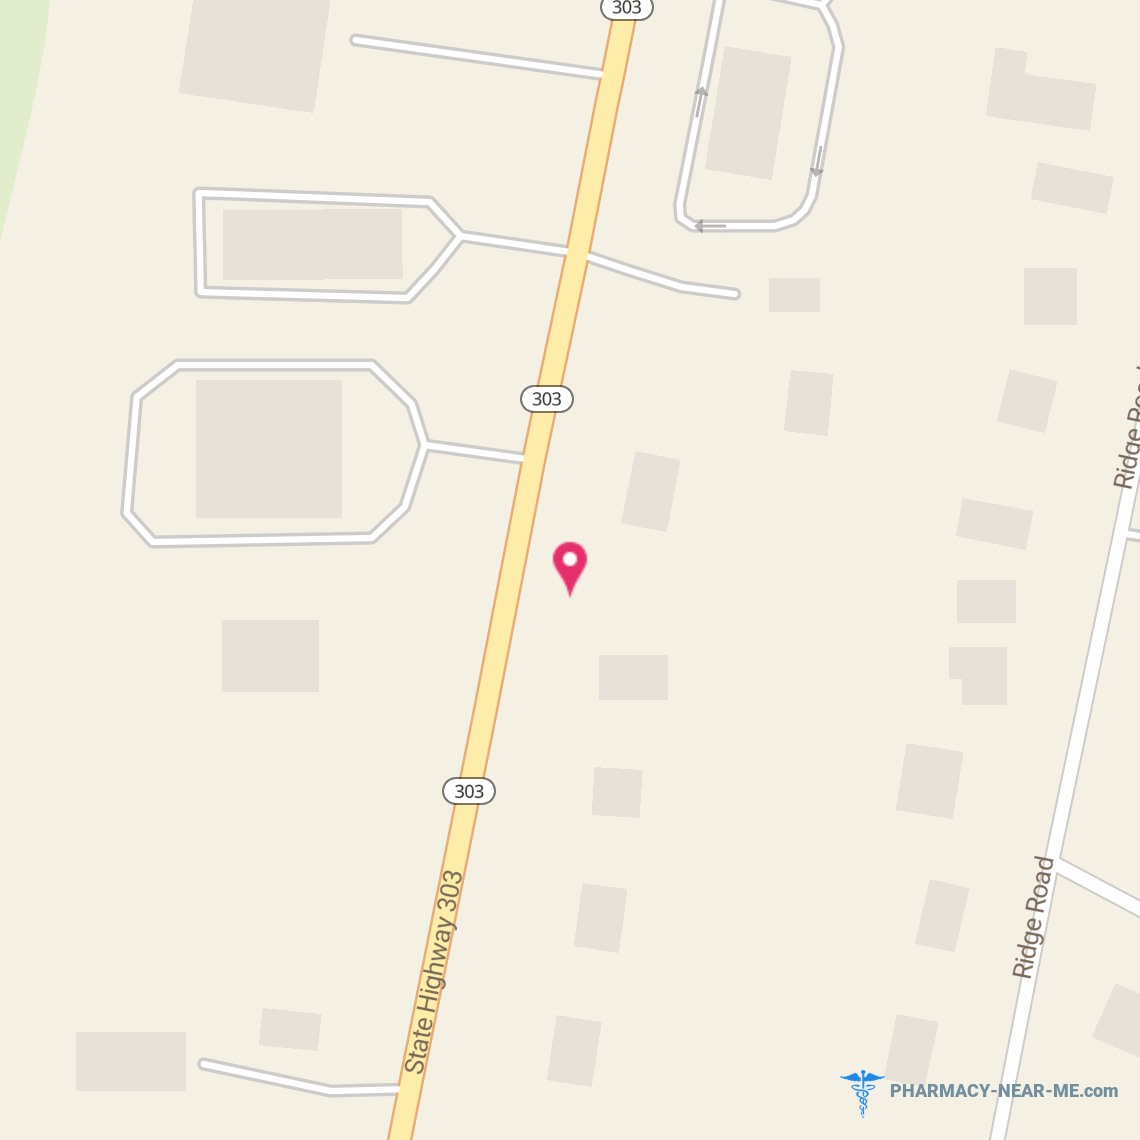 RITE AID PHARMACY 01019 - Pharmacy Hours, Phone, Reviews & Information: 133 Route 303, Valley Cottage, New York 10989, United States